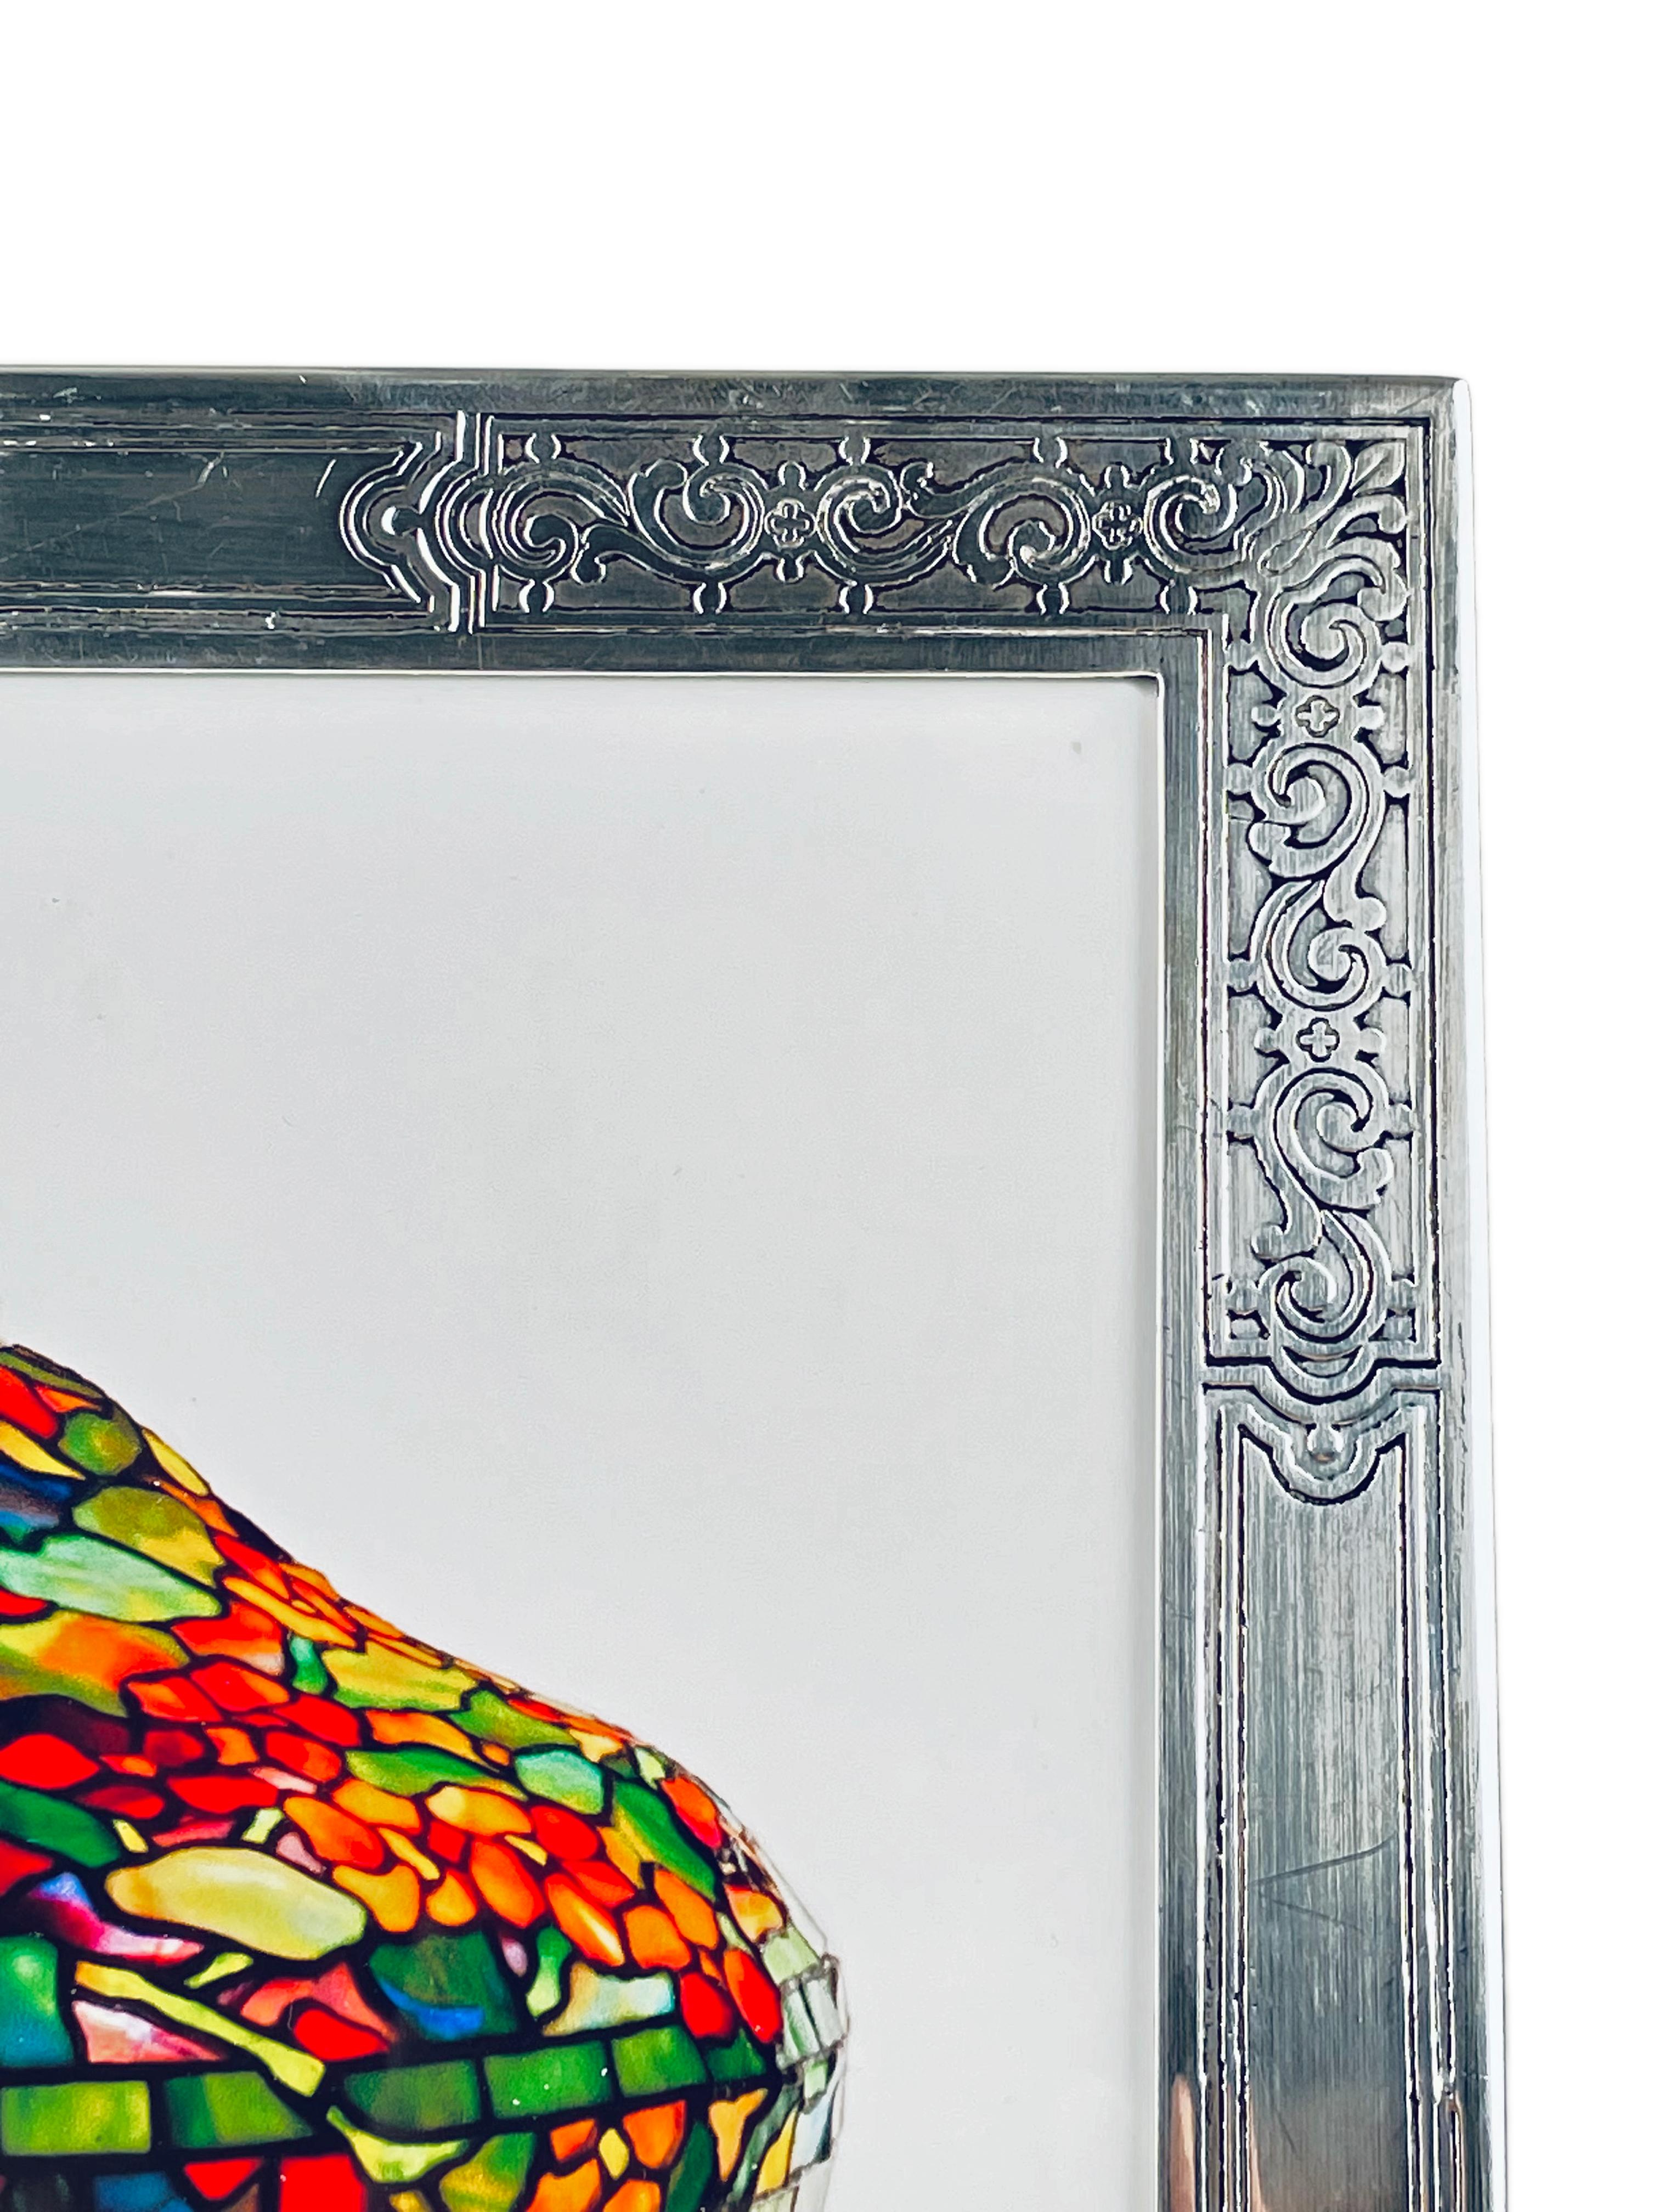 An early 20th century American Art Nouveau sterling silver and wood picture frame by, Tiffany & Co. with hand chased scroll motif throughout, without monogramming, retains its original wood and sterling back. The frame is marked 